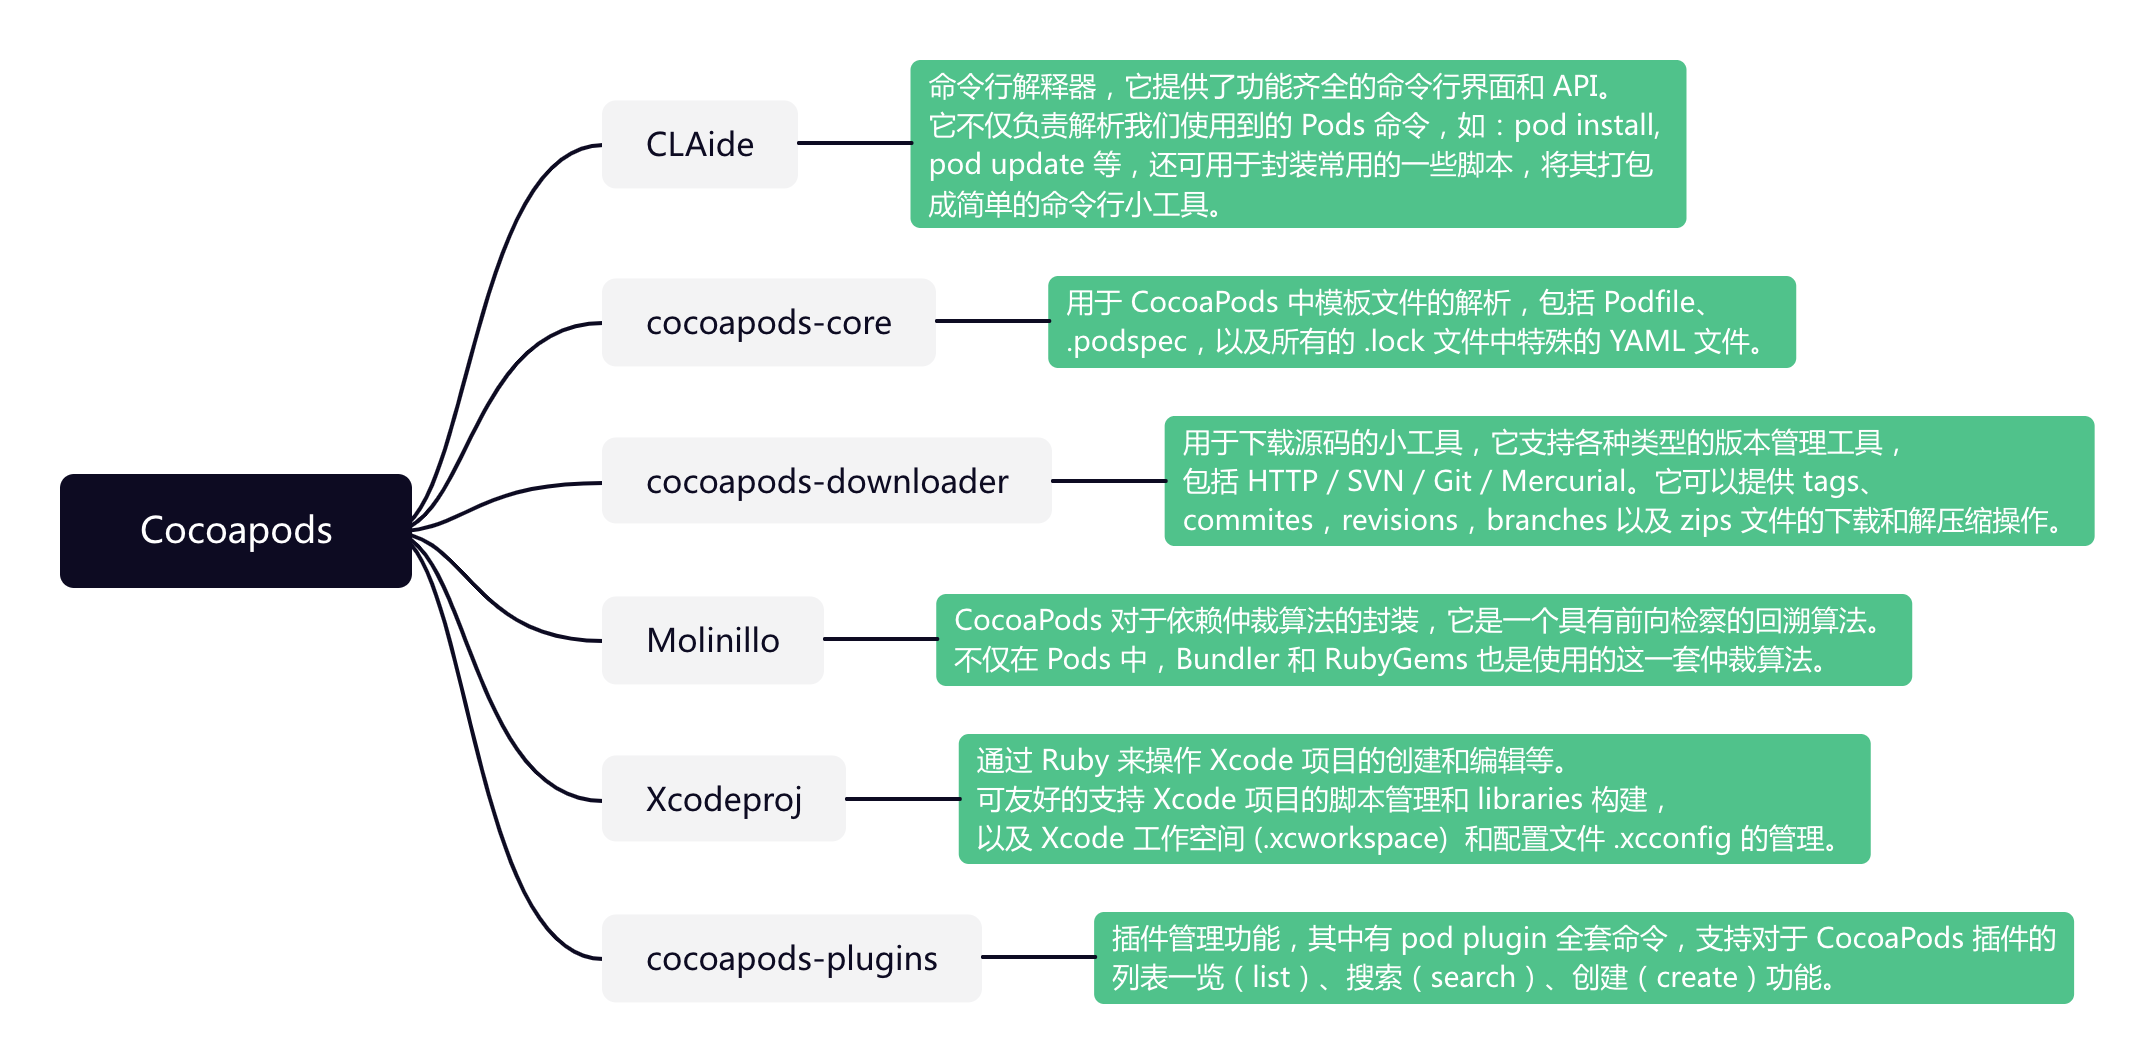 Cocoapods源码.png-389.3kB